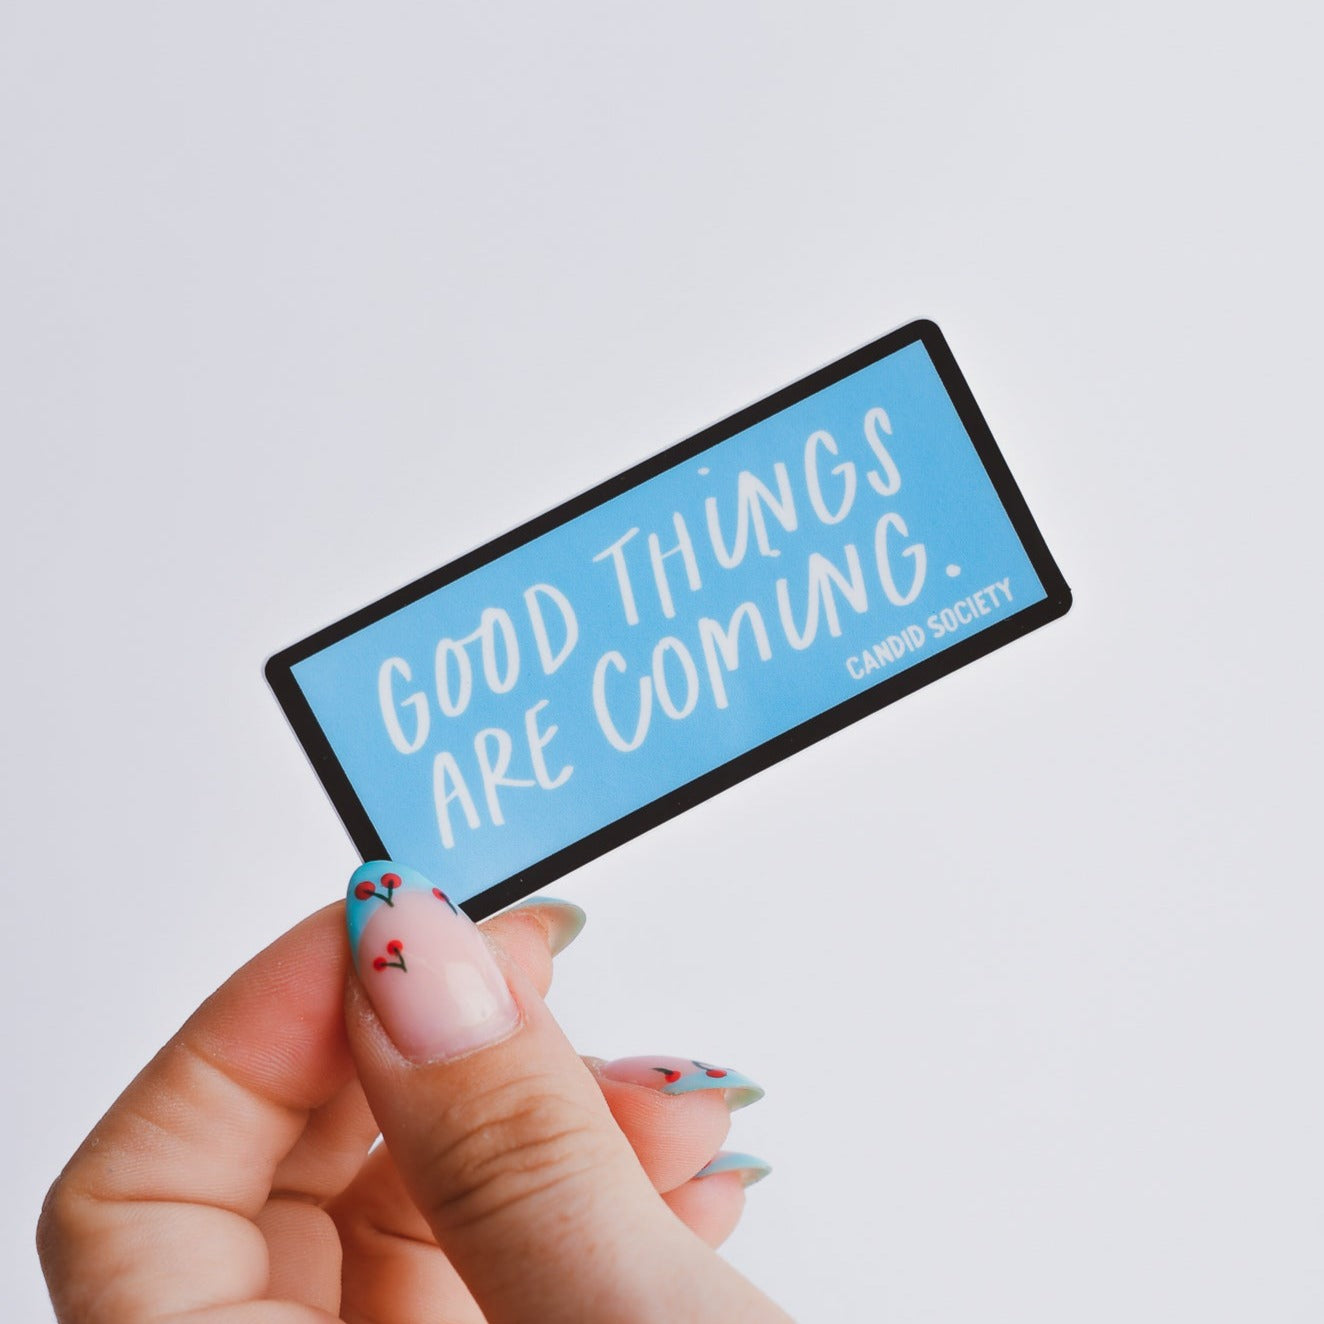 85 - Good Things are Coming - Premium Sticker